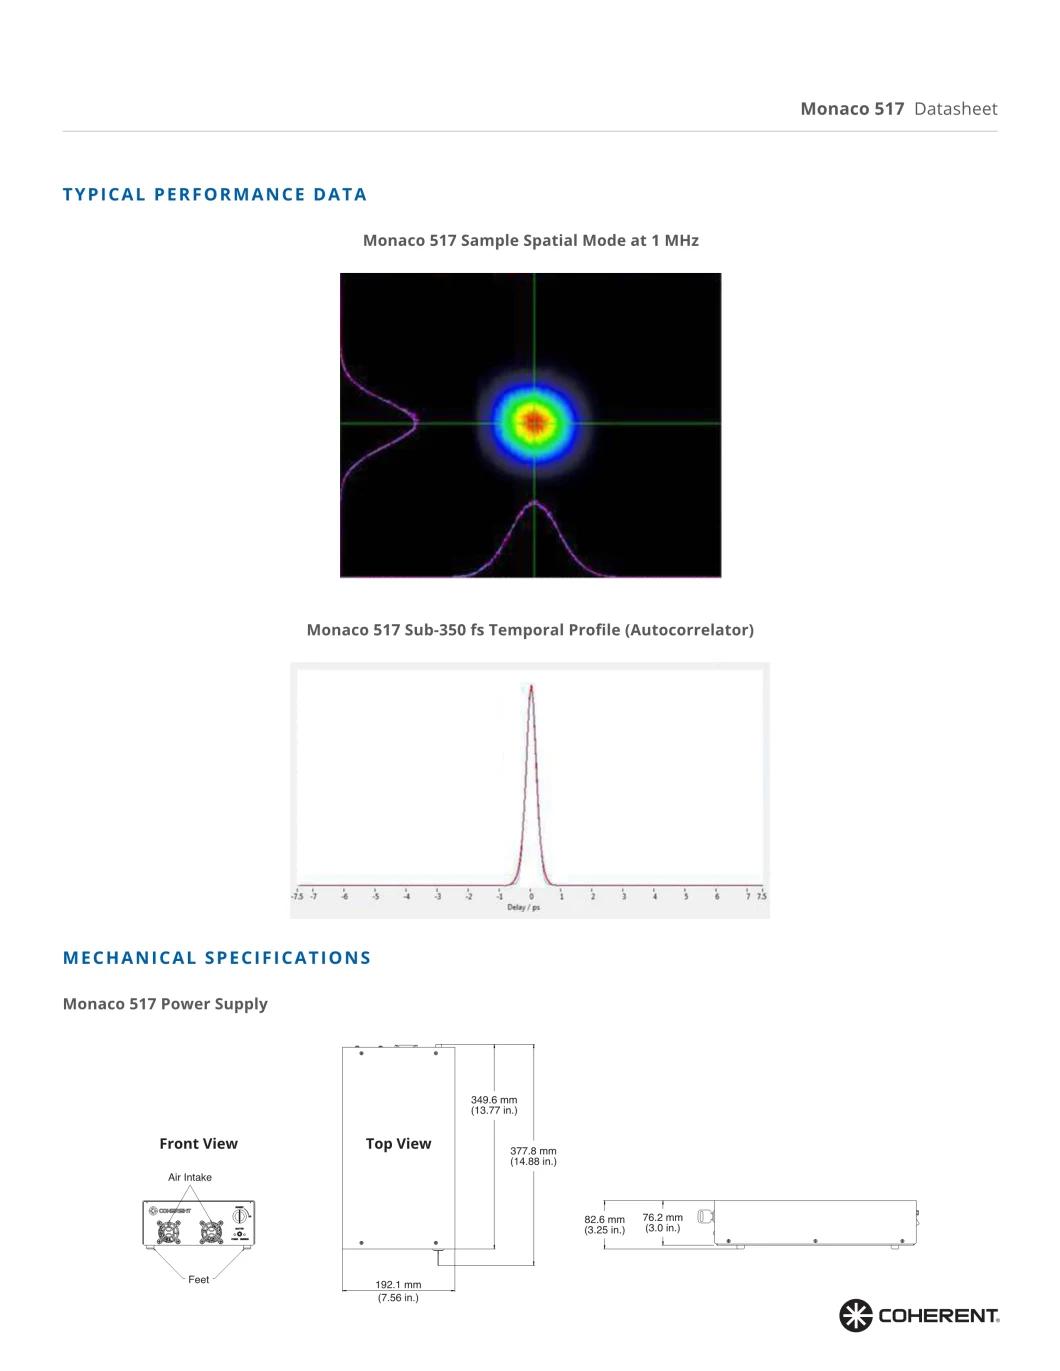 Used Coherent Ultrashort Pulse Lasers, Monaco 517-40-30 Advanced, High-Power Femtosecond Lasers